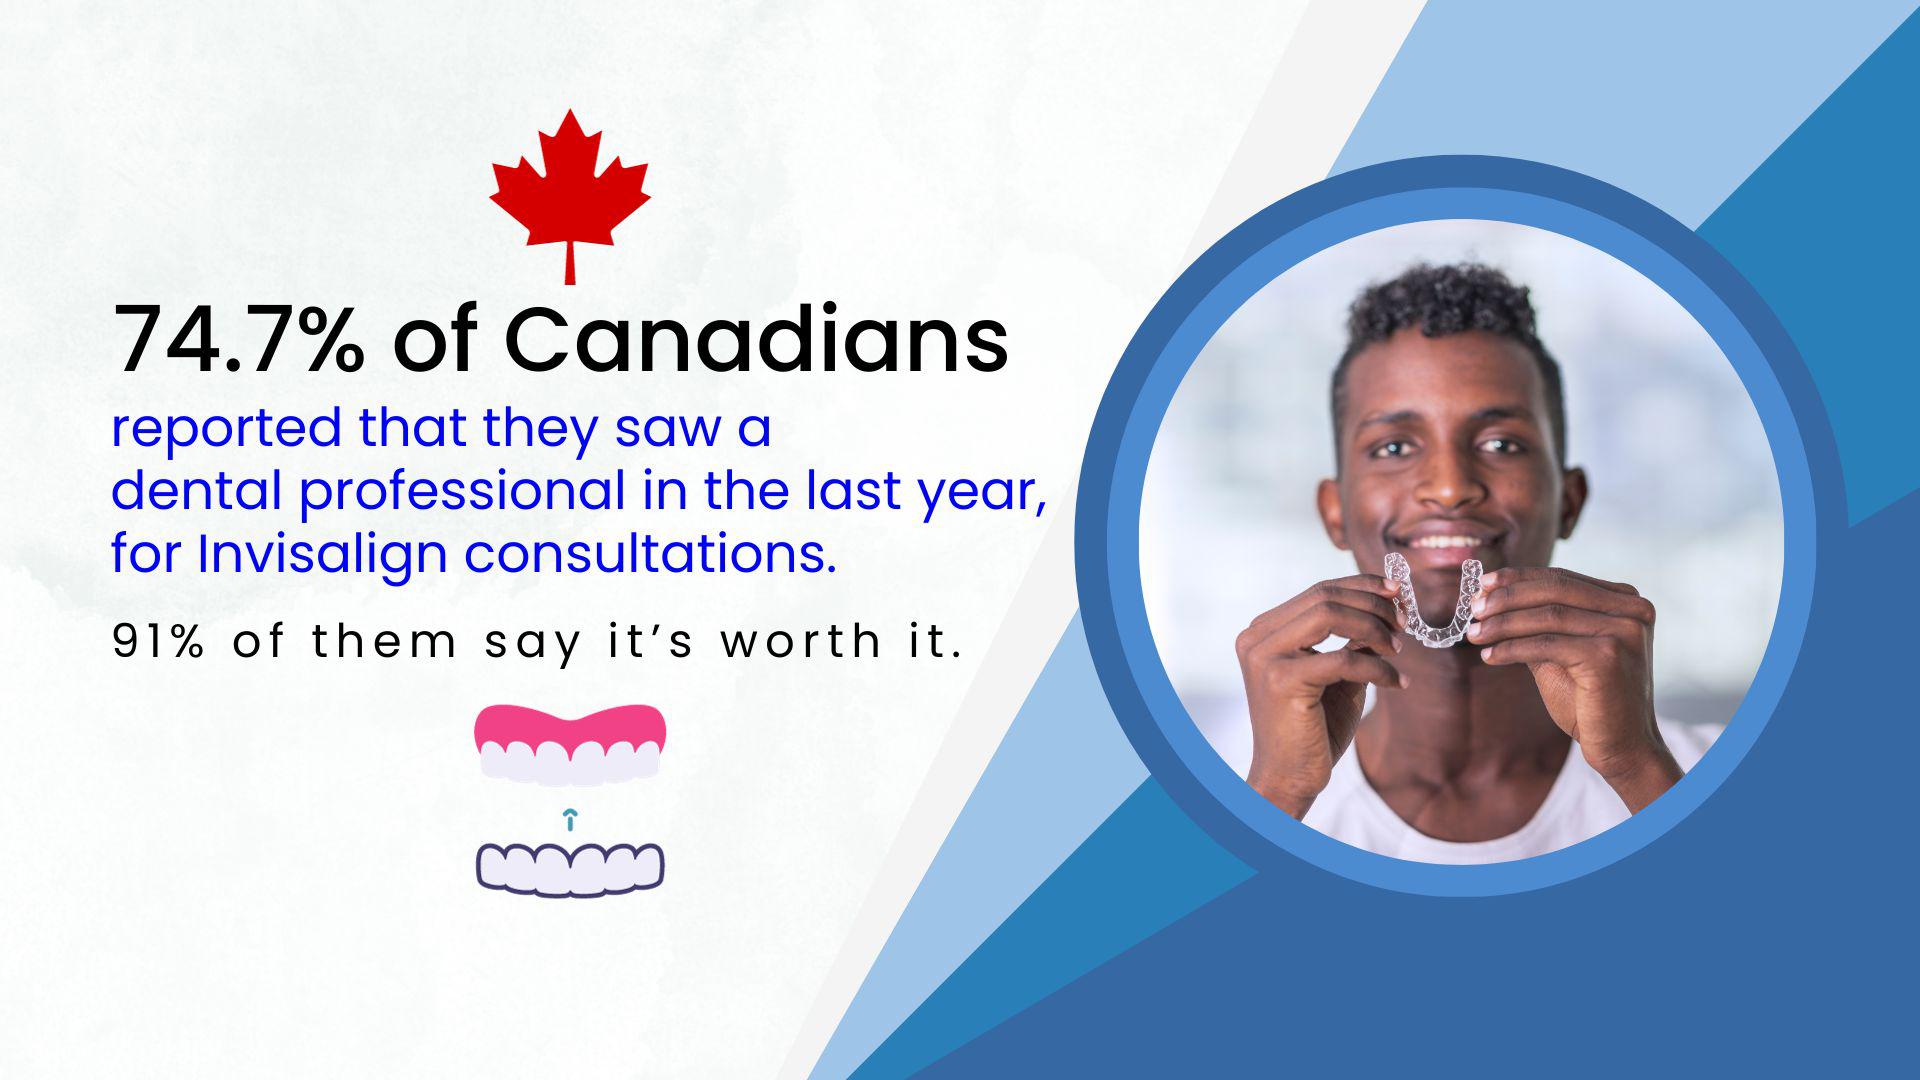 74.7% of Canadians reported that they saw a dental professional